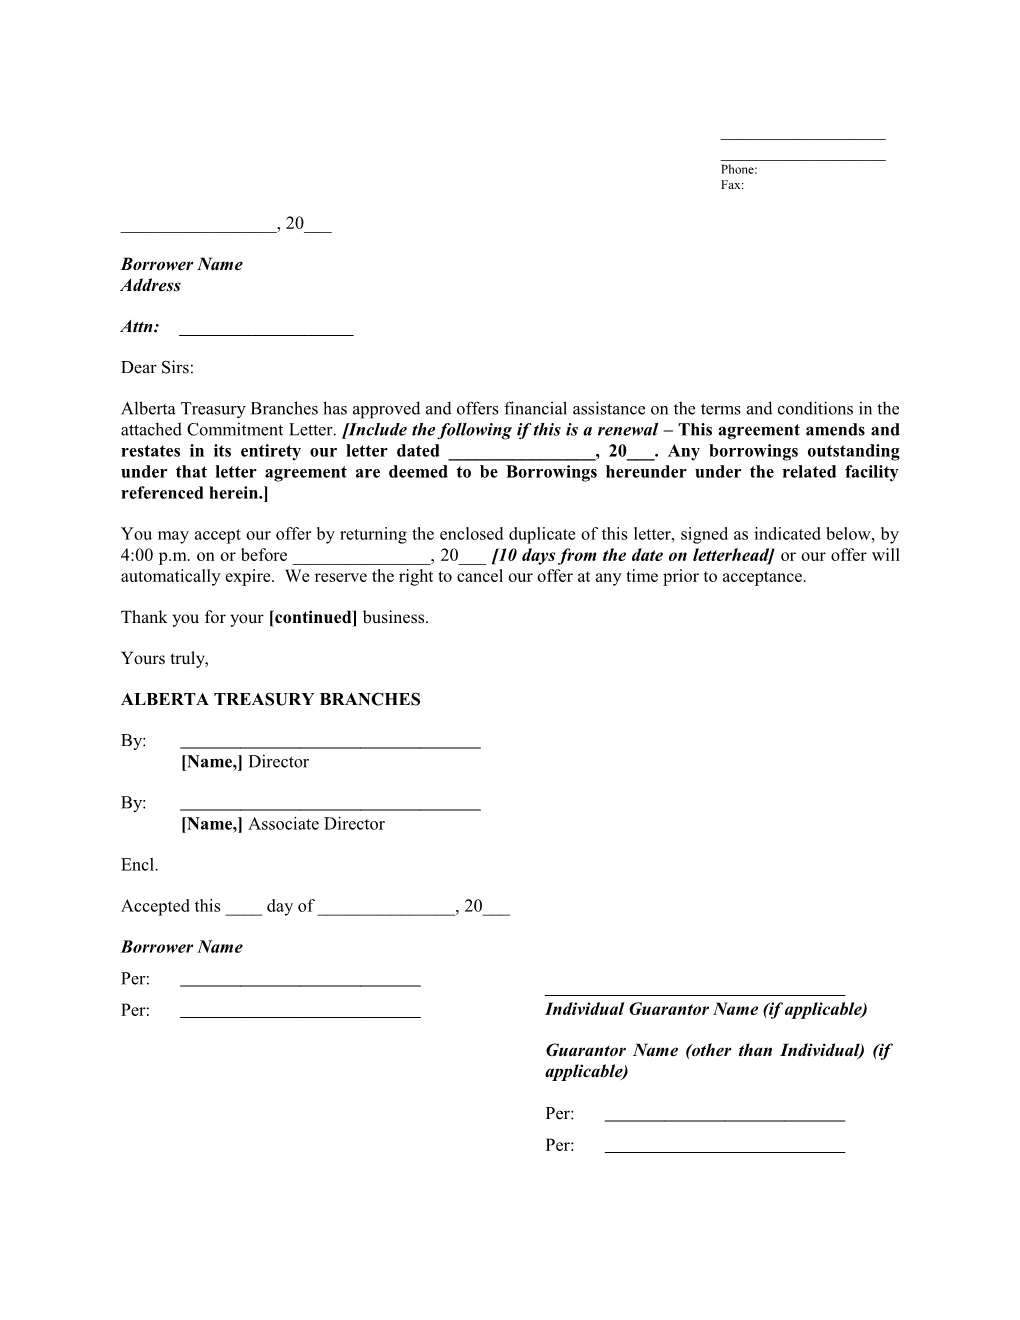 7520 - Commitment Letter - General Industry